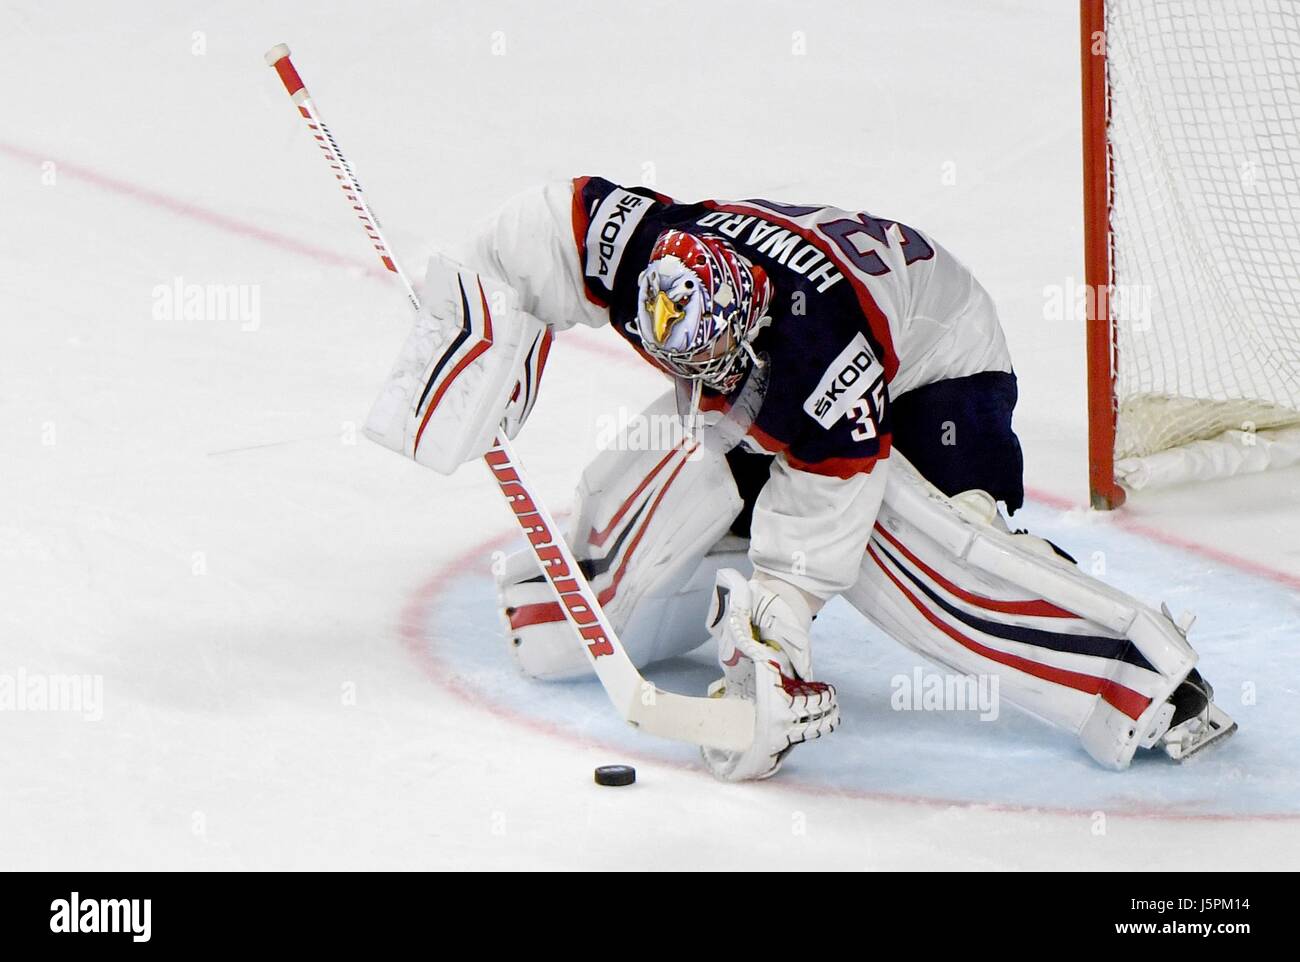 Cologne, Germany. 18th May, 2017. American goalkeeper Jimmy Howard catches the puck during the Ice Hockey World Championship quarter-final match between the US and Final in the Lanxess Arena in Cologne, Germany, 18 May 2017. Photo: Monika Skolimowska/dpa/Alamy Live News Stock Photo